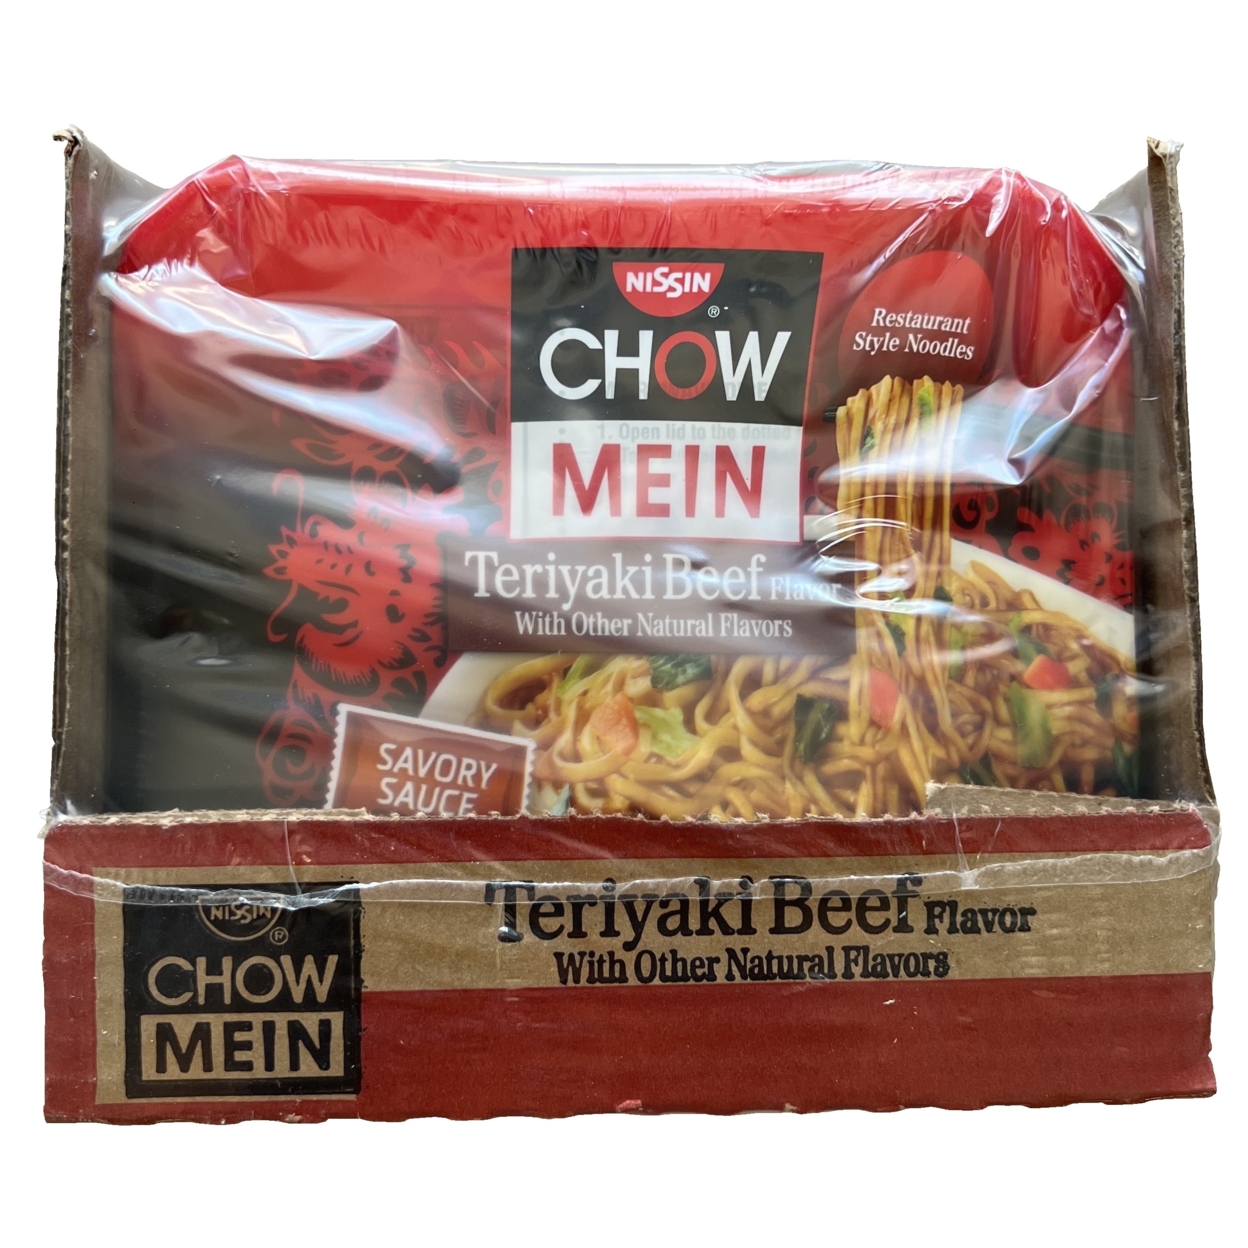 Nissin Chow Mein Noodles, Teriyaki Beef, 2.73 Ounce (8 Count)